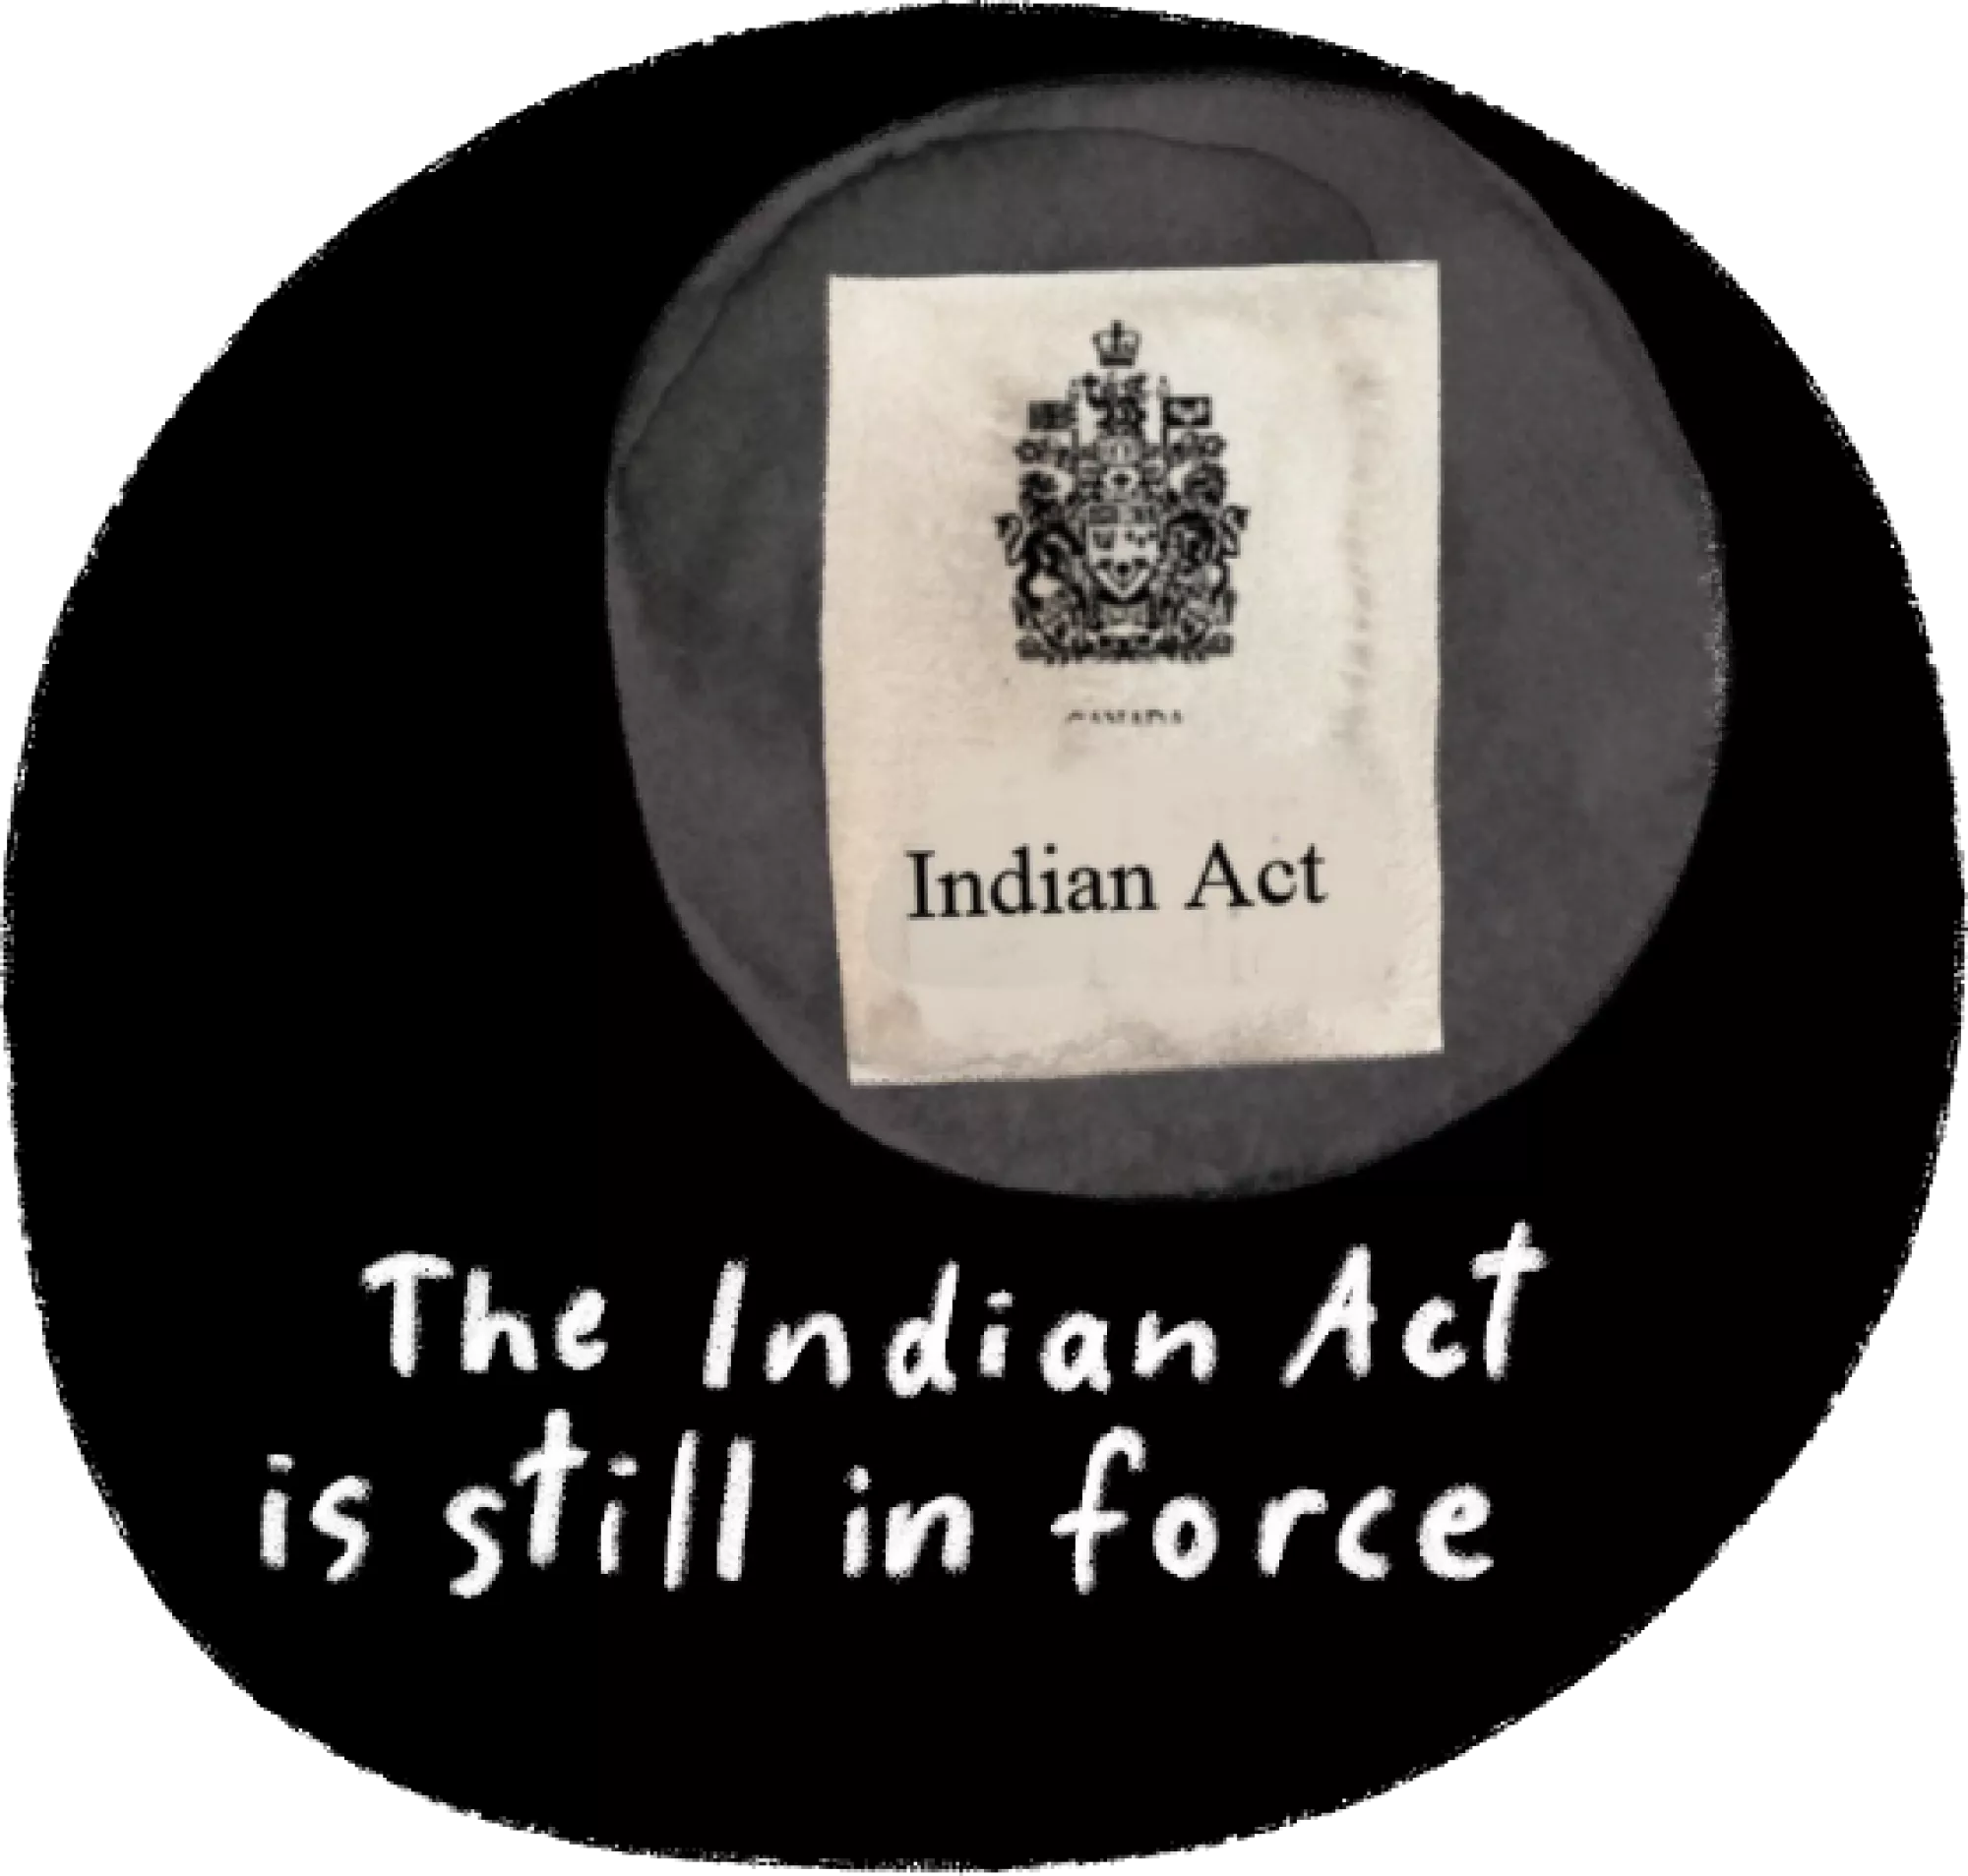 The Indian act is still in force